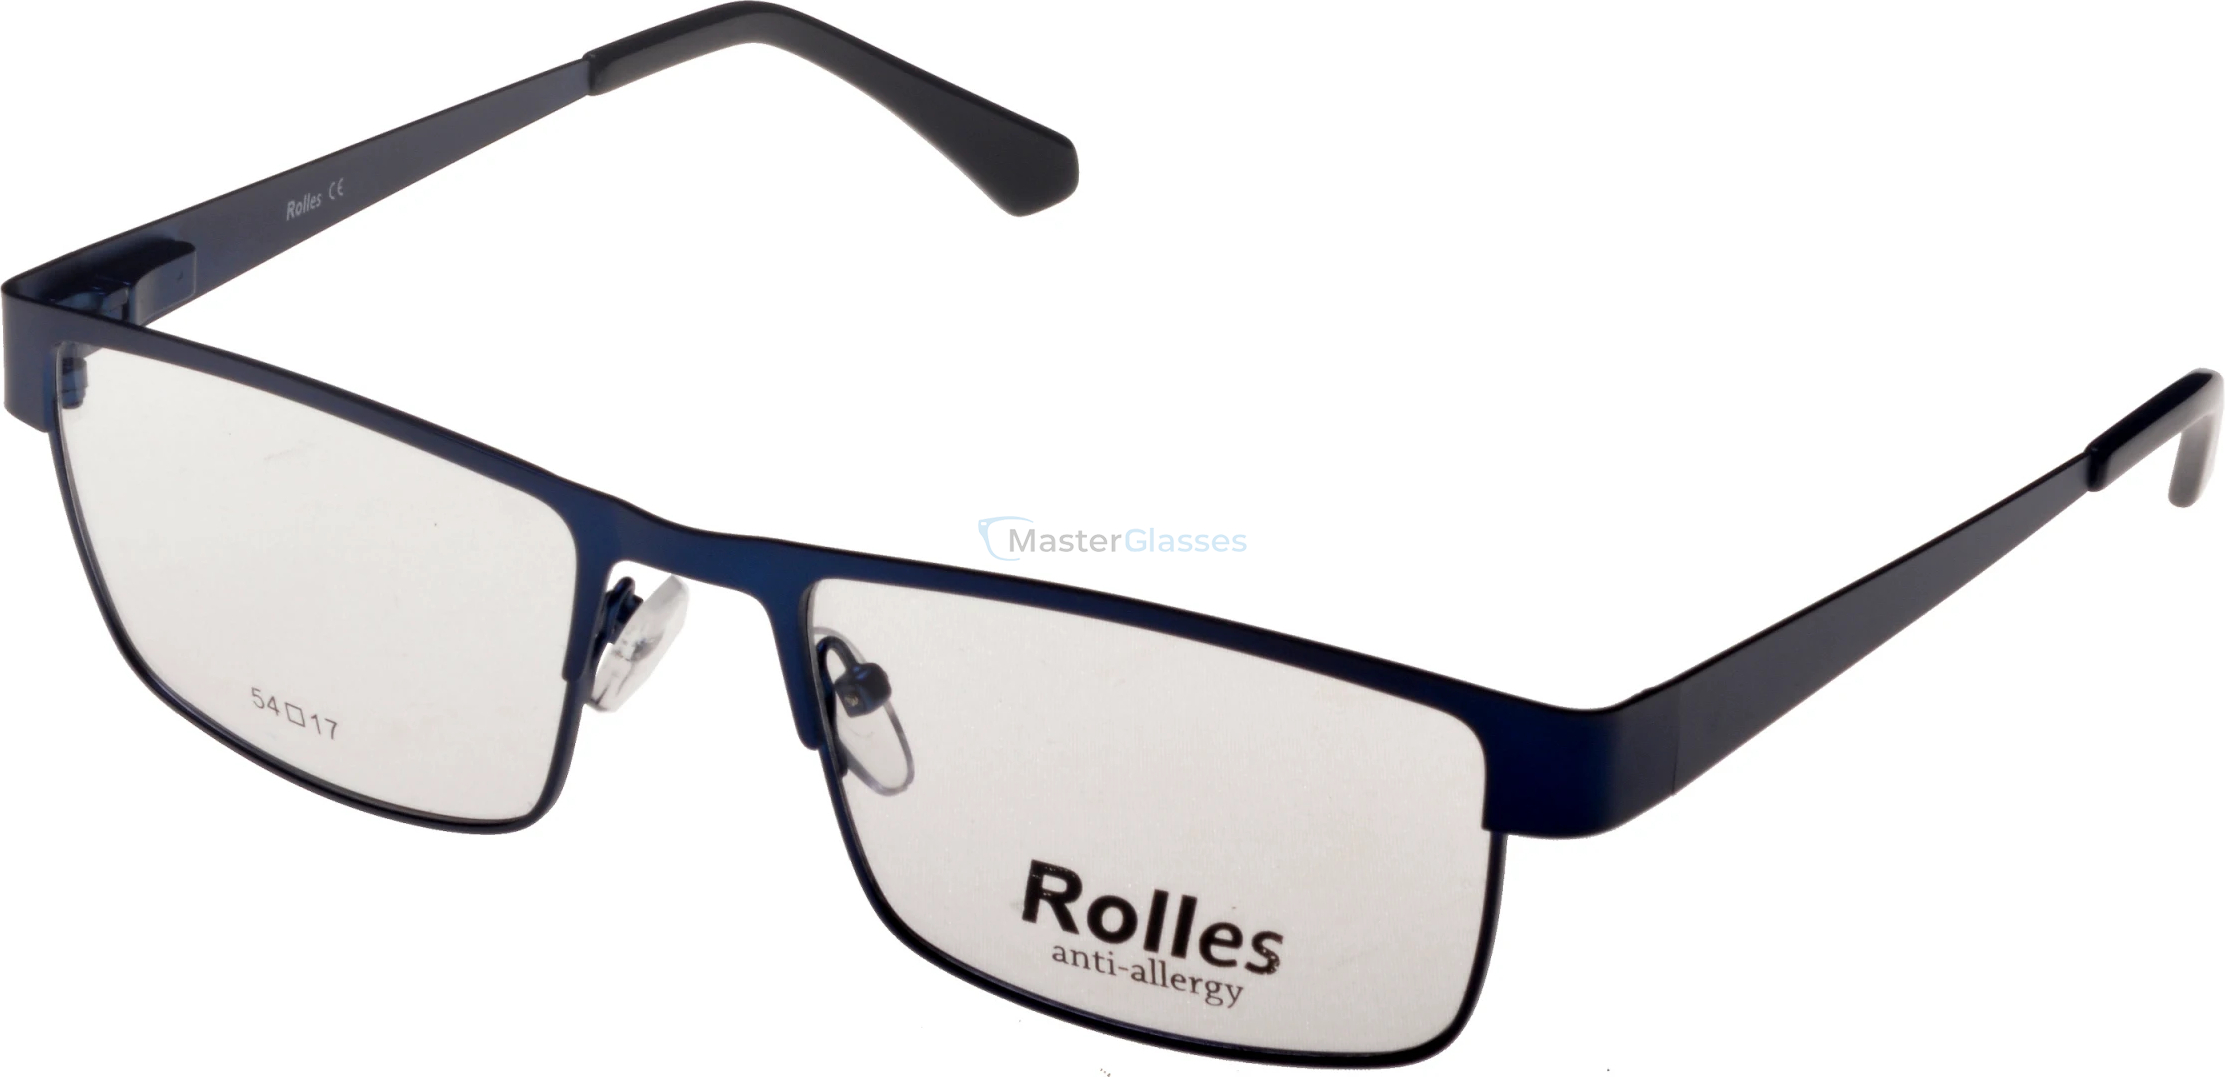  Rolles 726 04